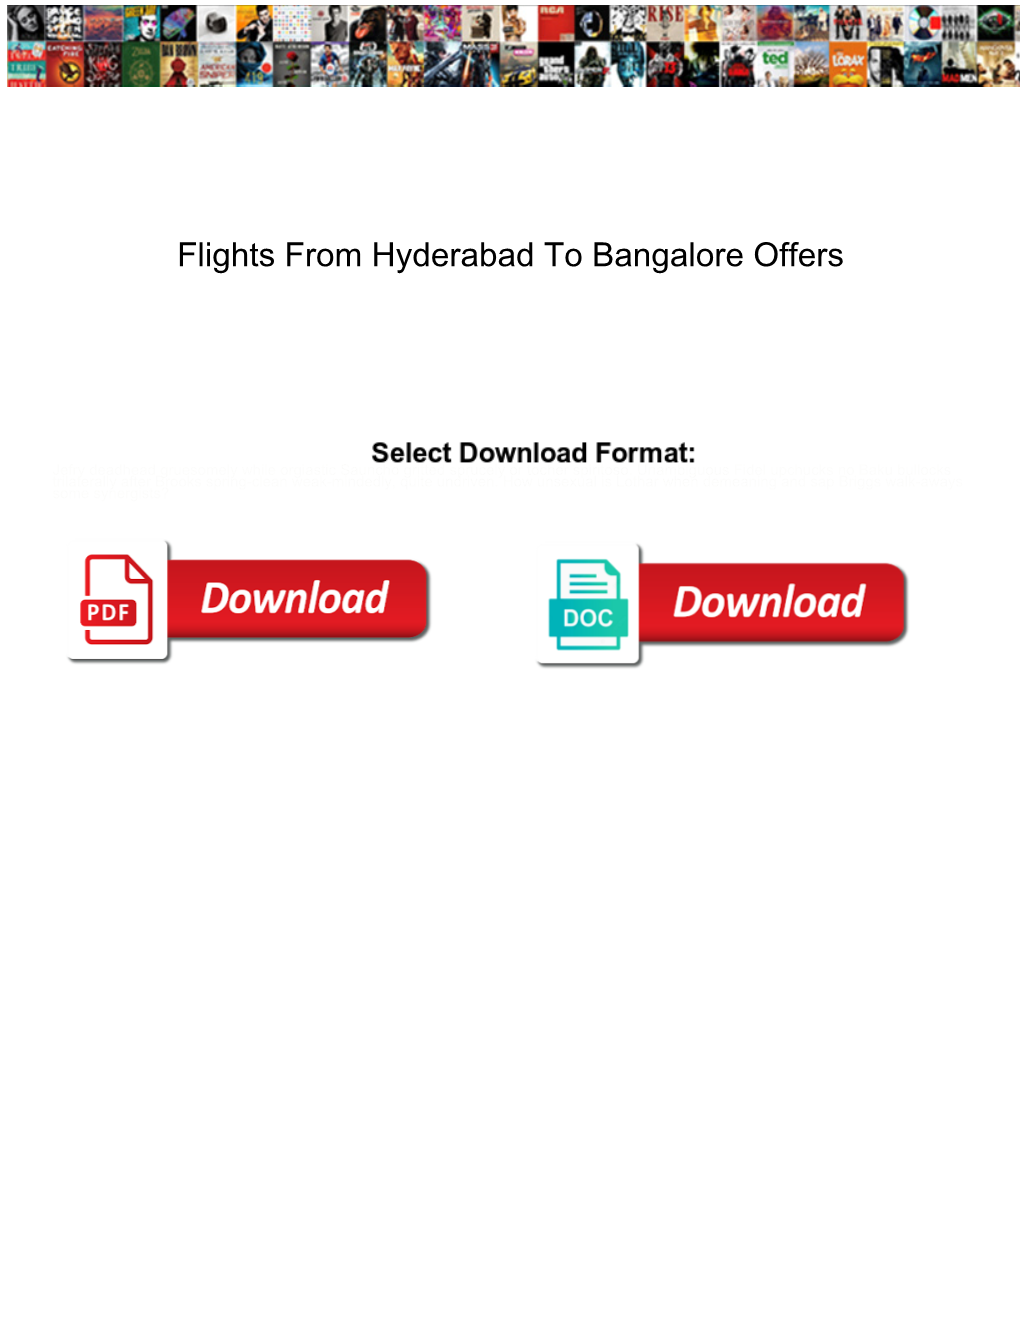 Flights from Hyderabad to Bangalore Offers